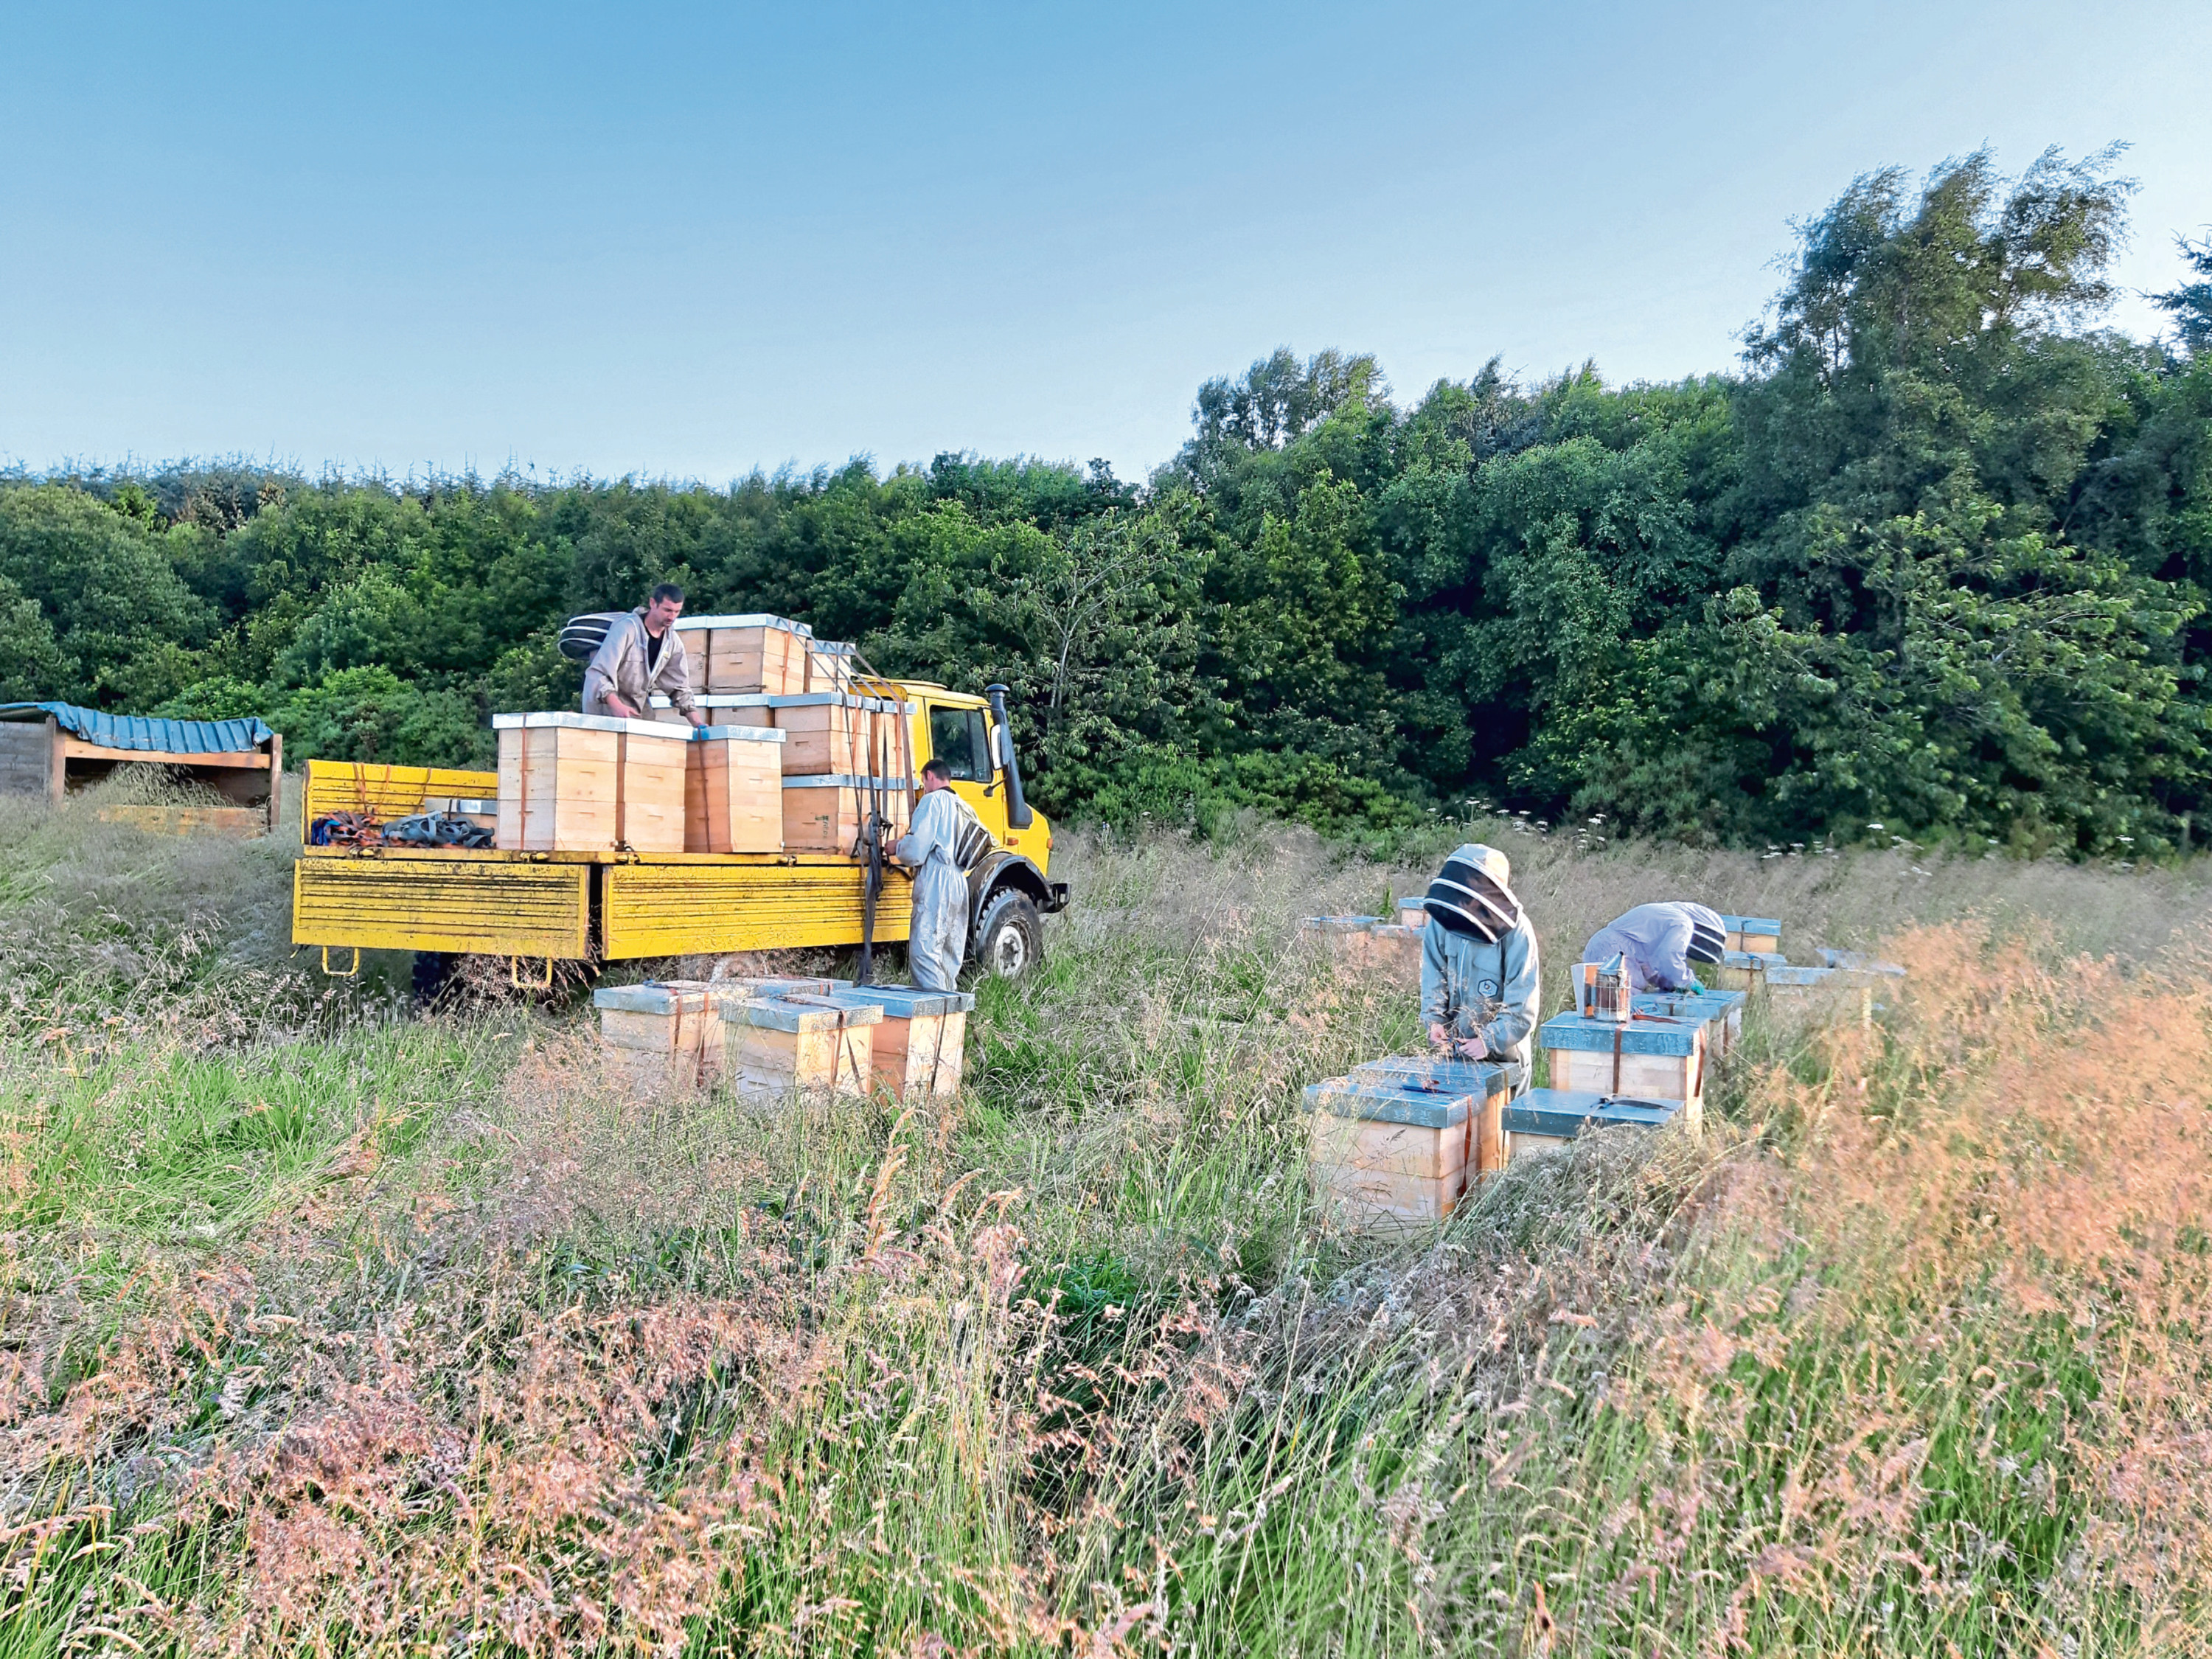 Hives are loaded on to the Unimogs to be transported to the heather harvest.